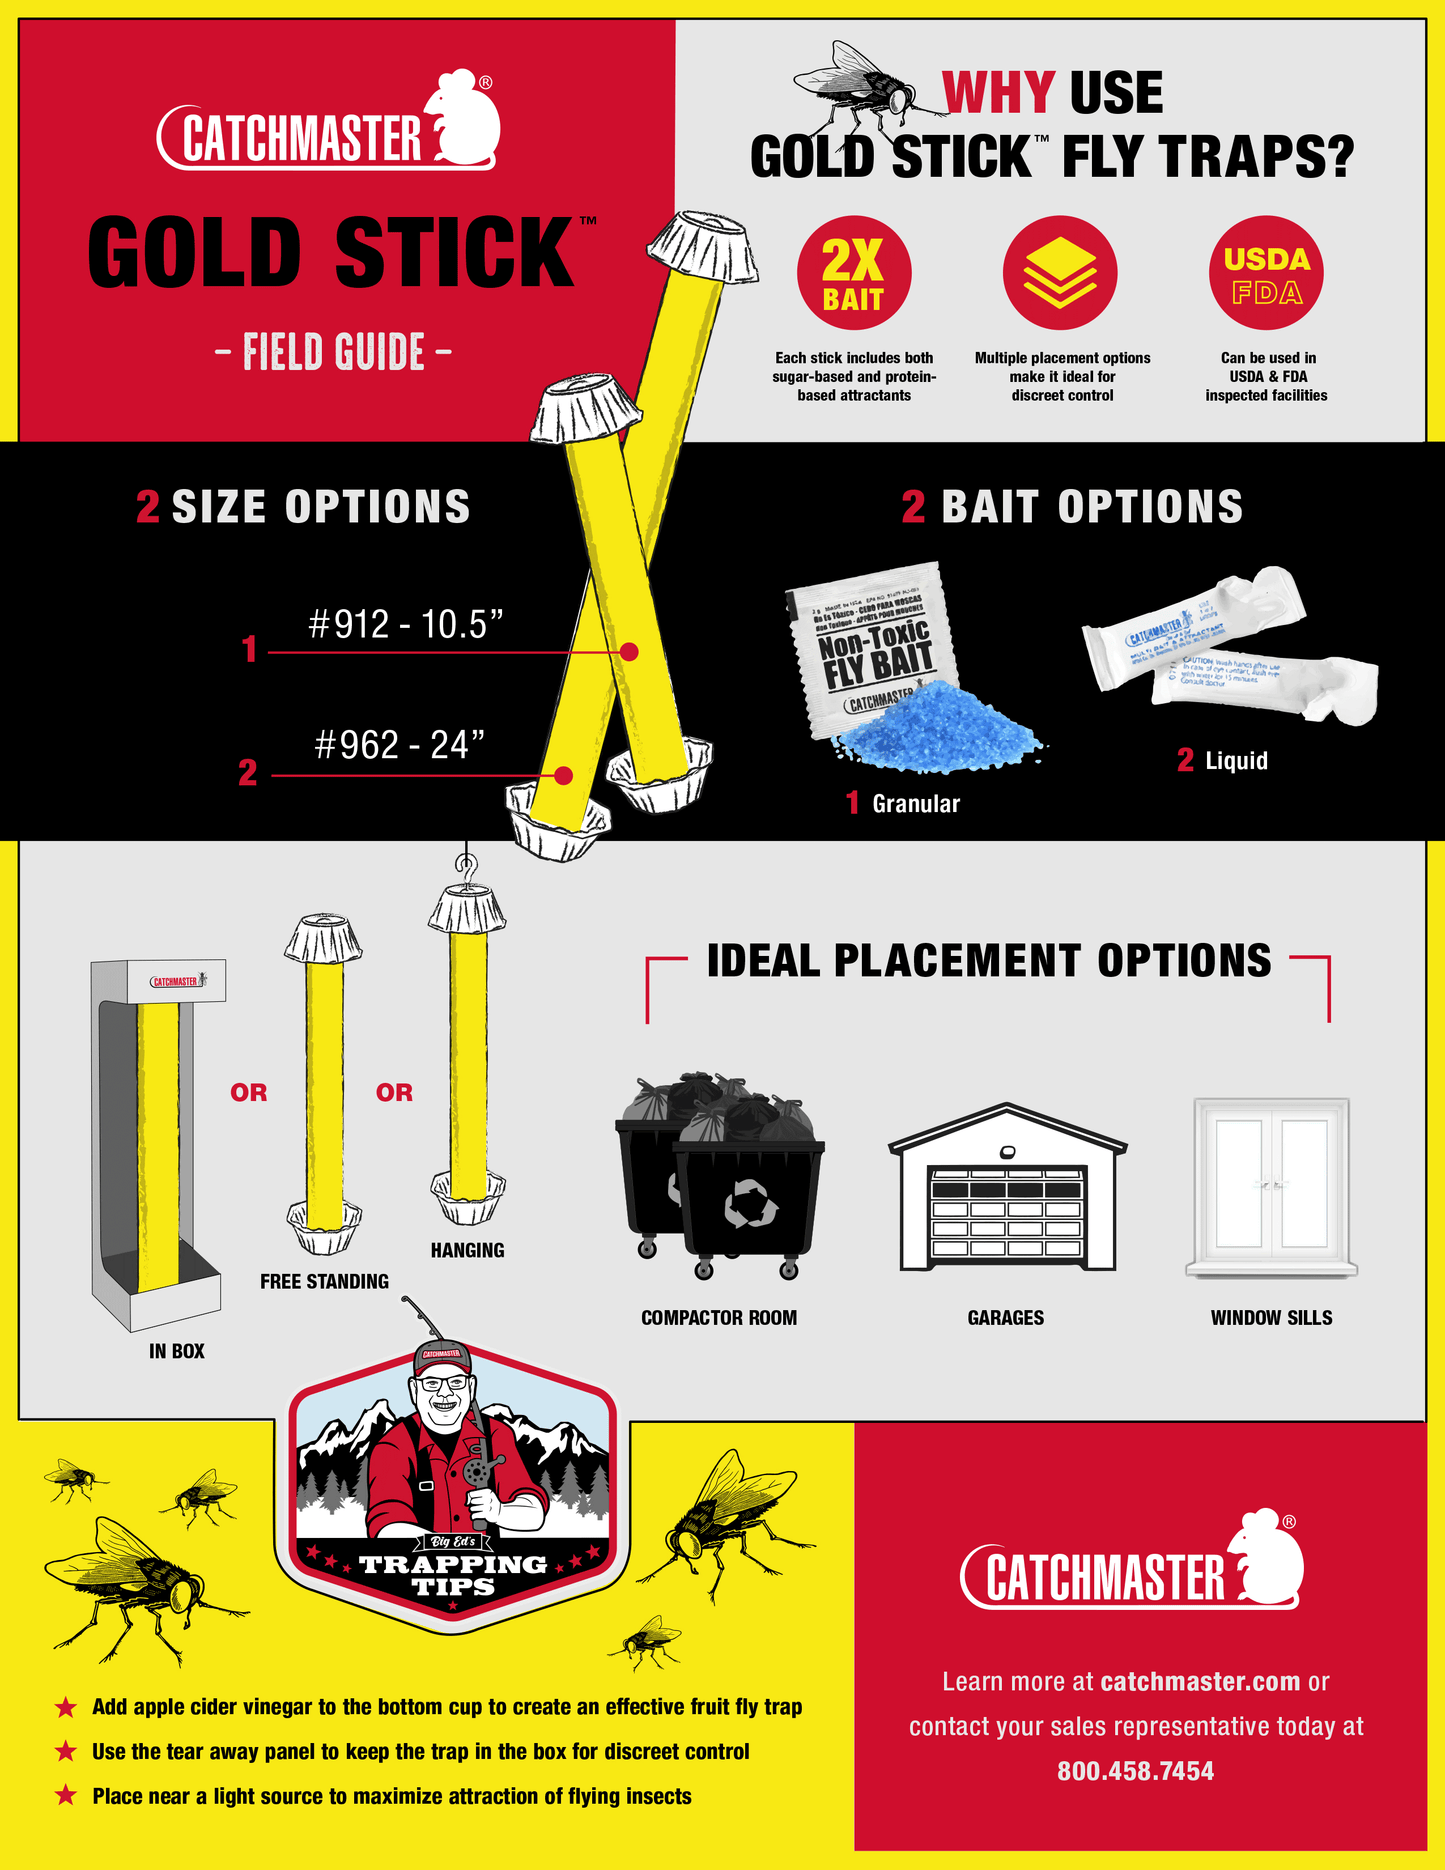 Gold Stick™ Fly Traps